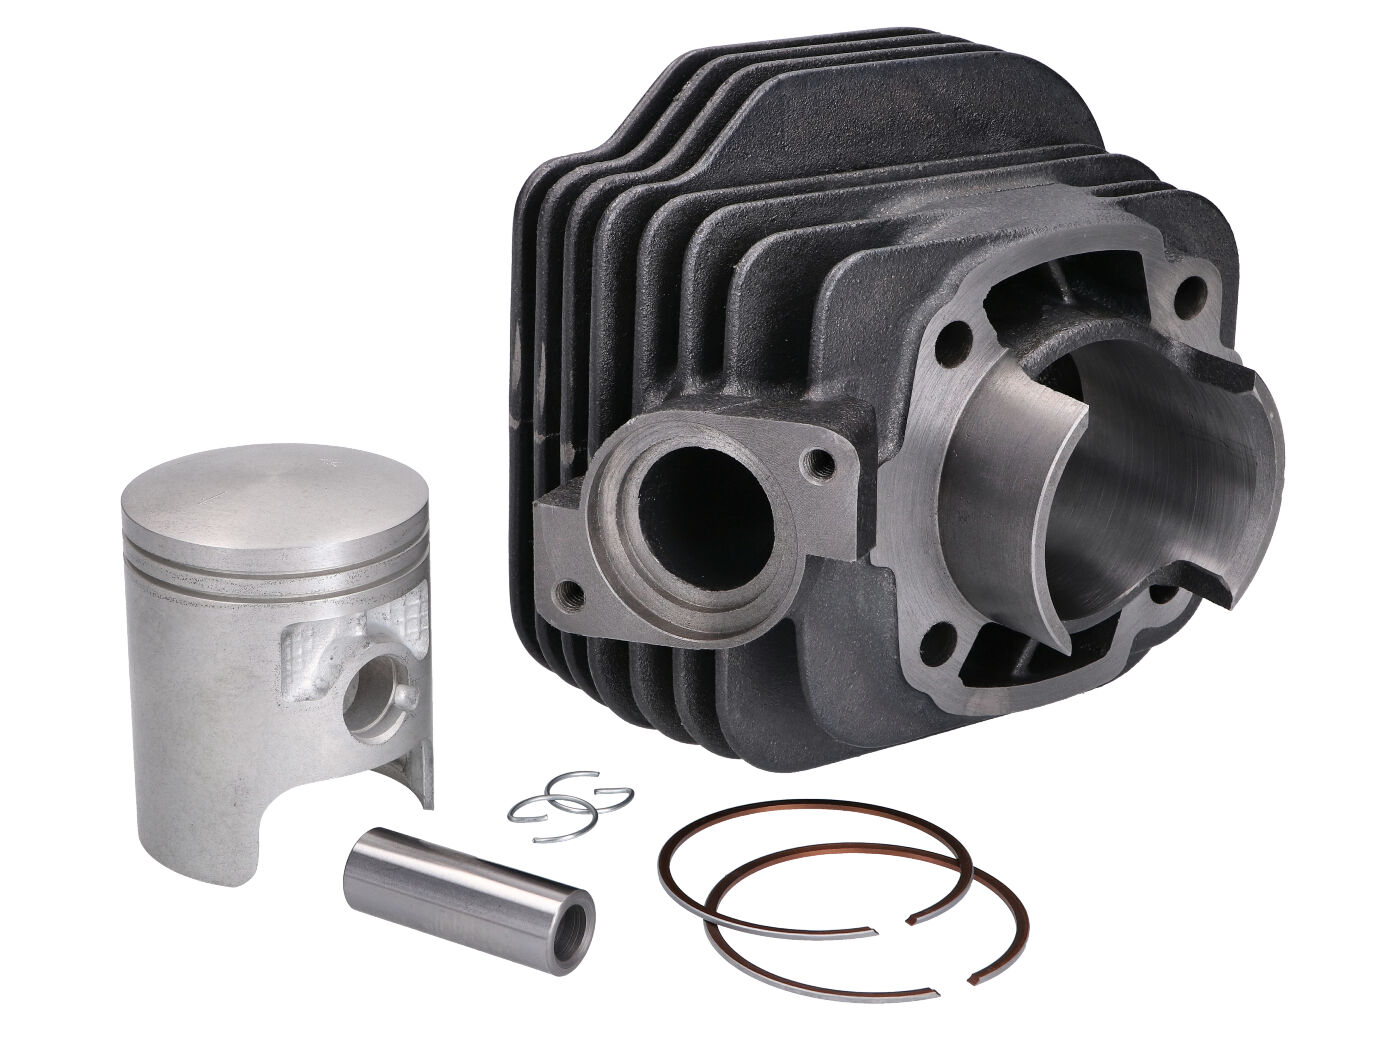 Peugeot Scooter Engine Parts - 100cc Cylinder Kit w/o gasket set for Peugeot Speedfight, Trekker, Vivacity, Elyseo 100 Scooters | Scooter | Racing Planet USA